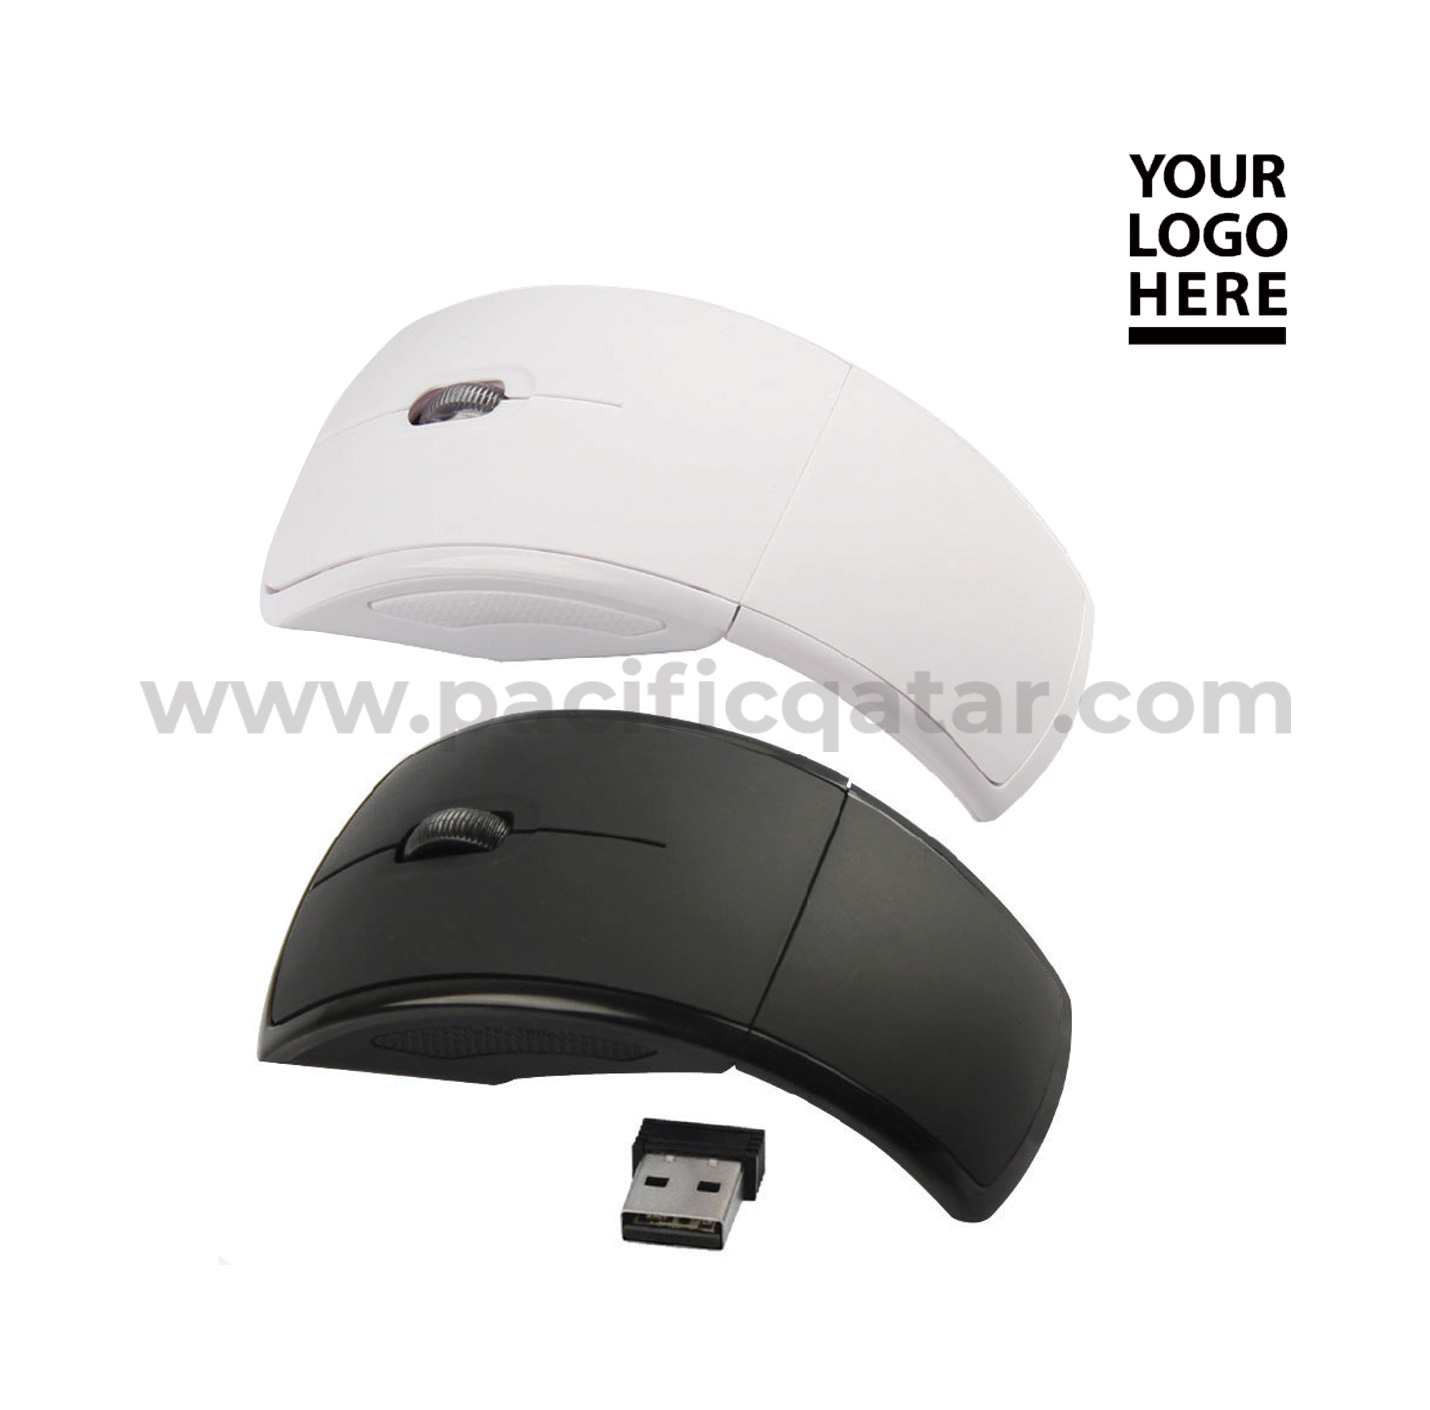 Wireless mouse foldable